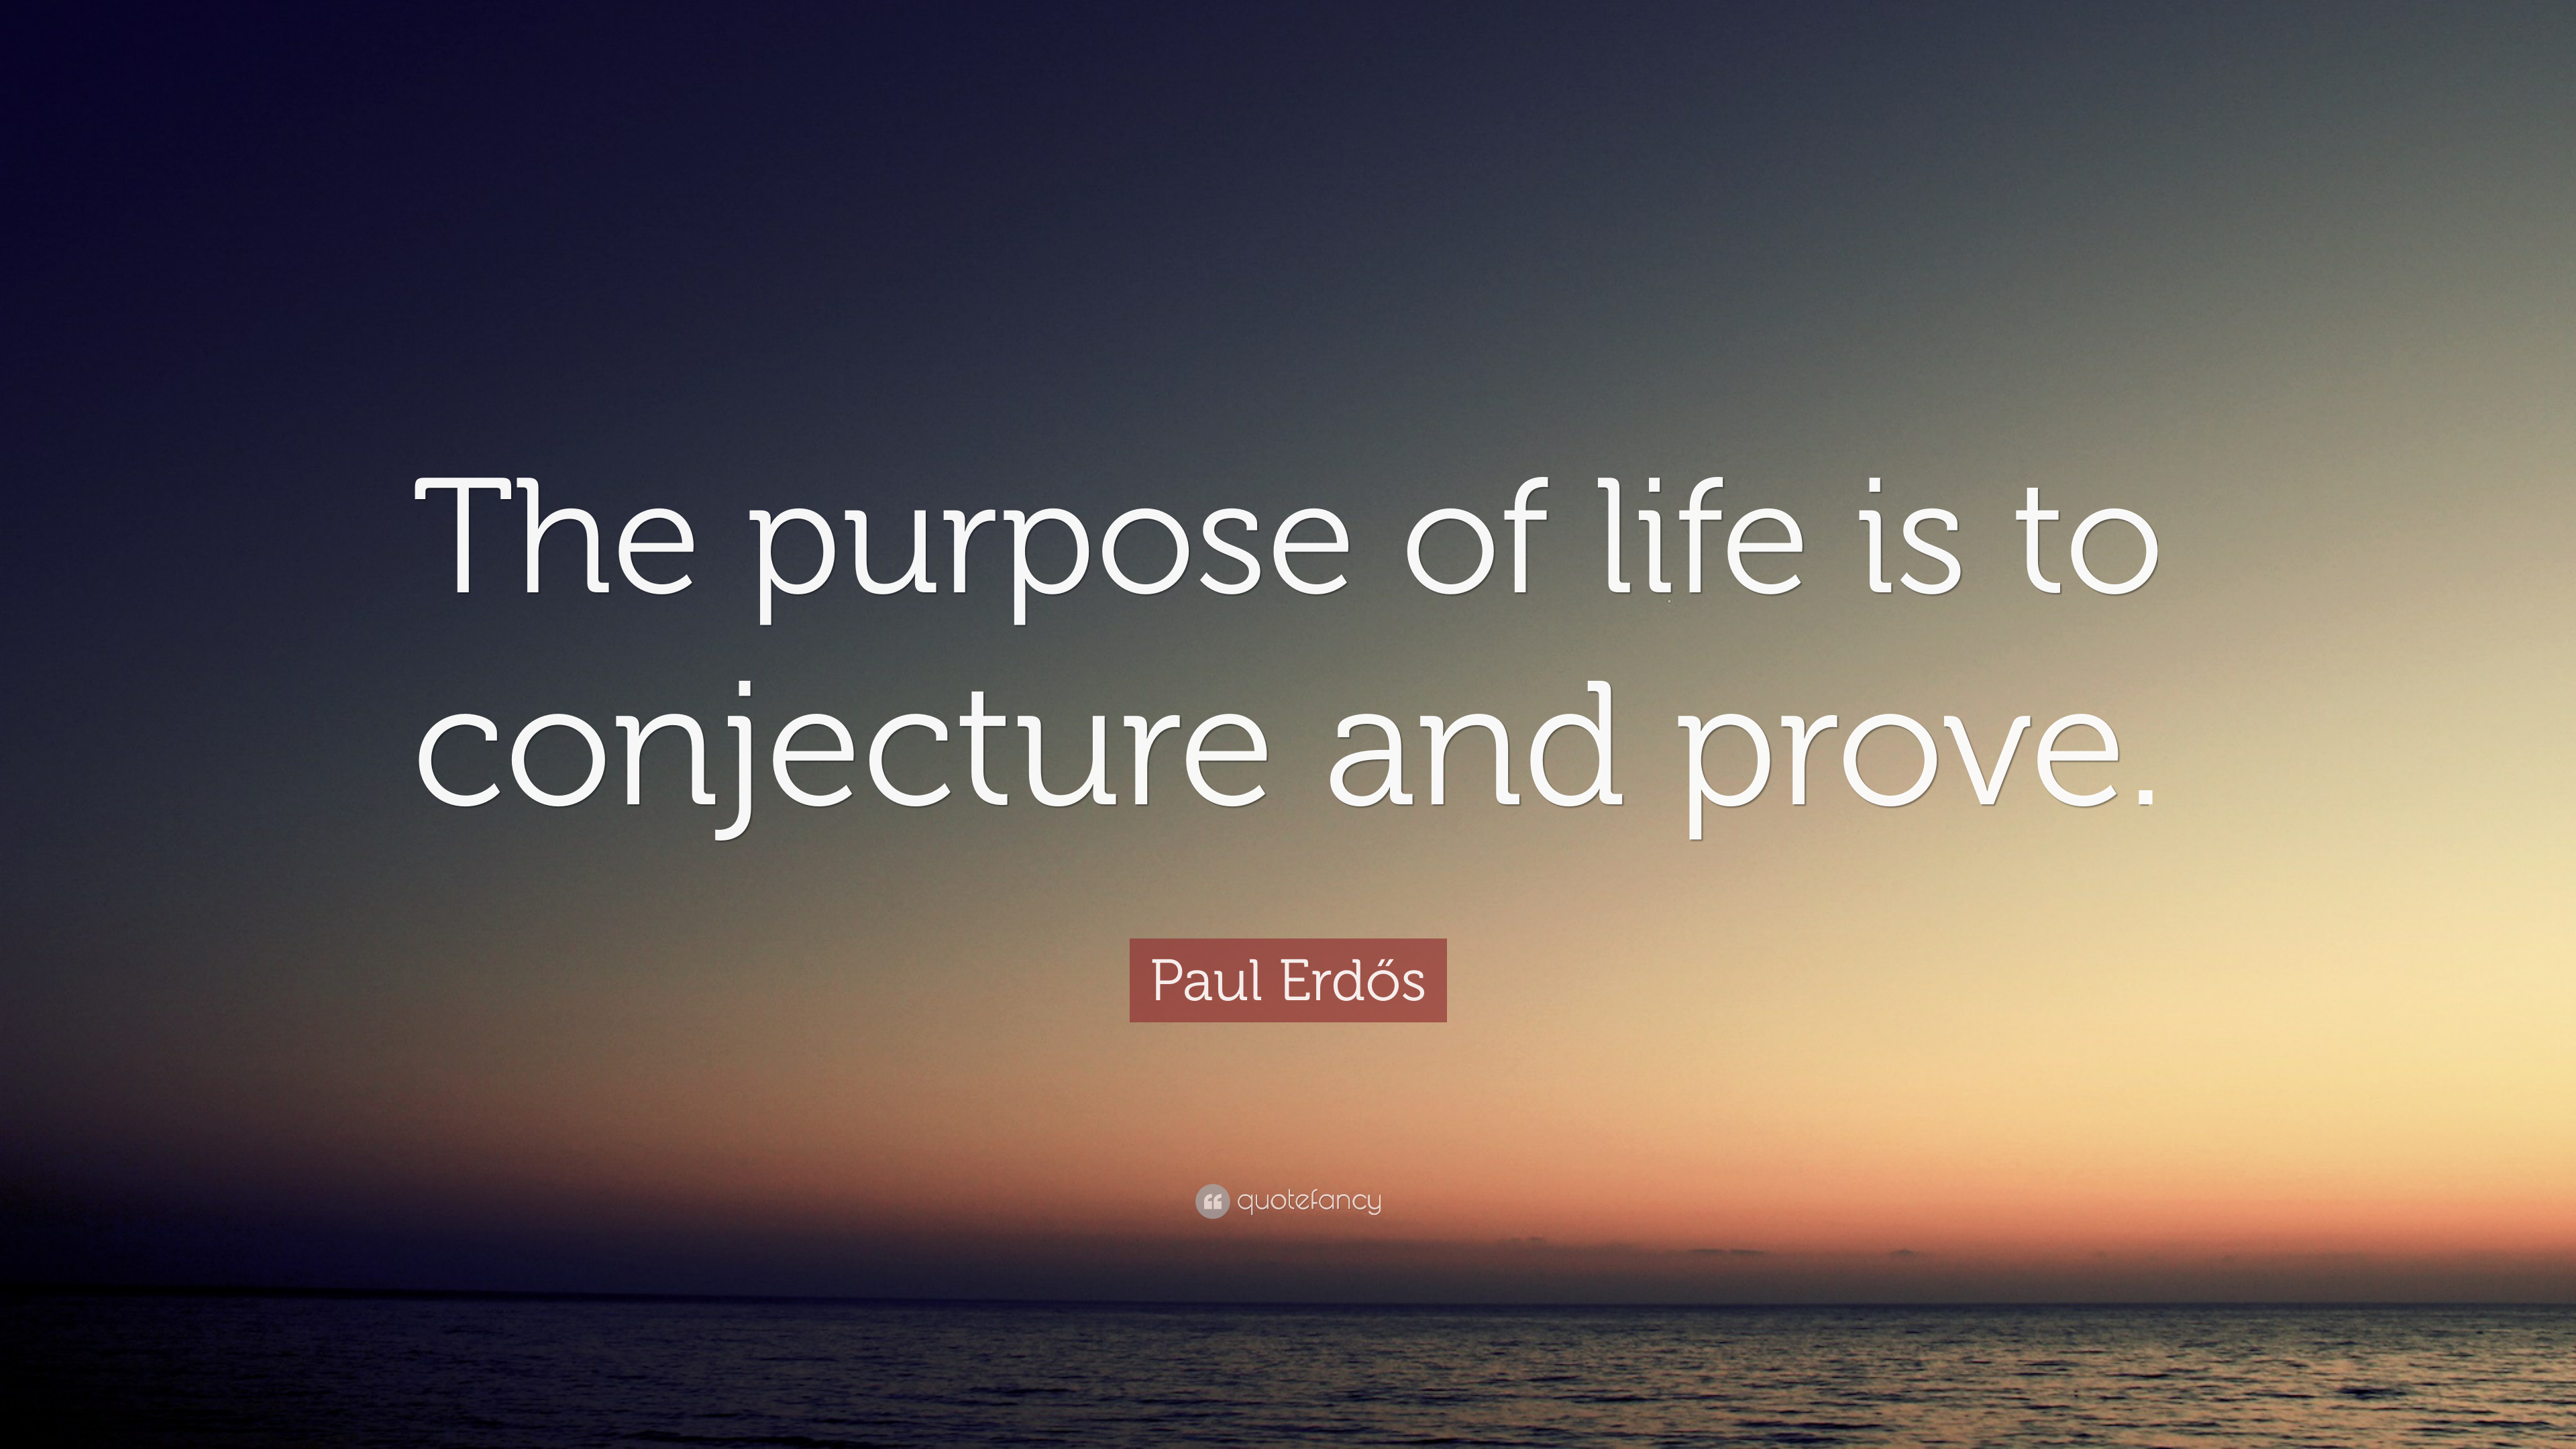 Paul Erdős Quote: “The purpose of life is to conjecture and prove